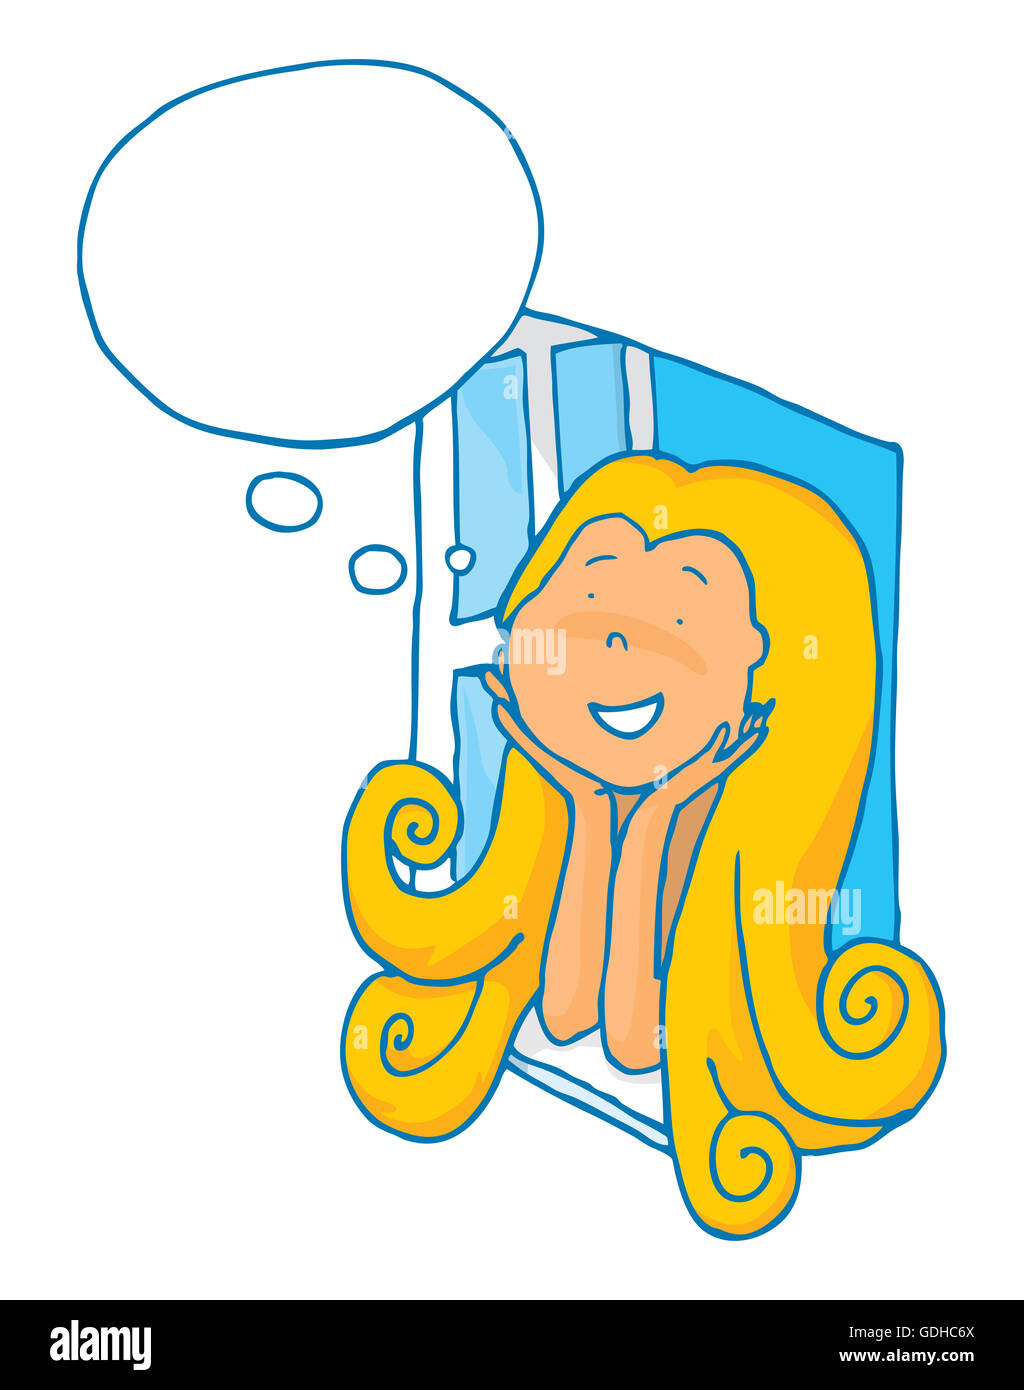 Cartoon illustration of cute girl using her imagination with blank thought bubble Stock Photo